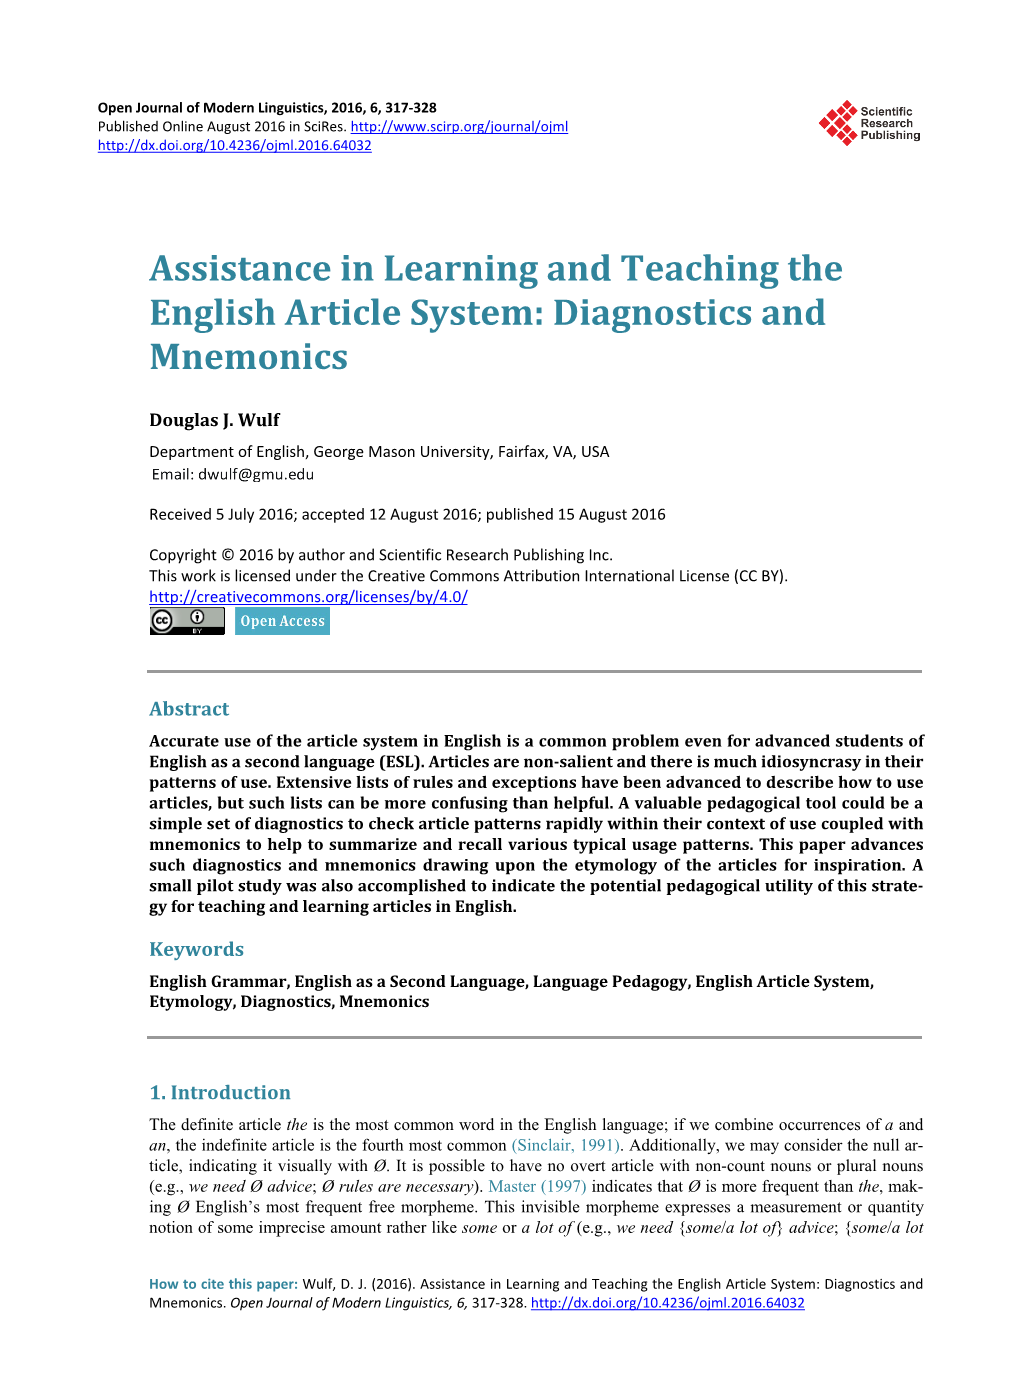 Assistance in Learning and Teaching the English Article System: Diagnostics and Mnemonics